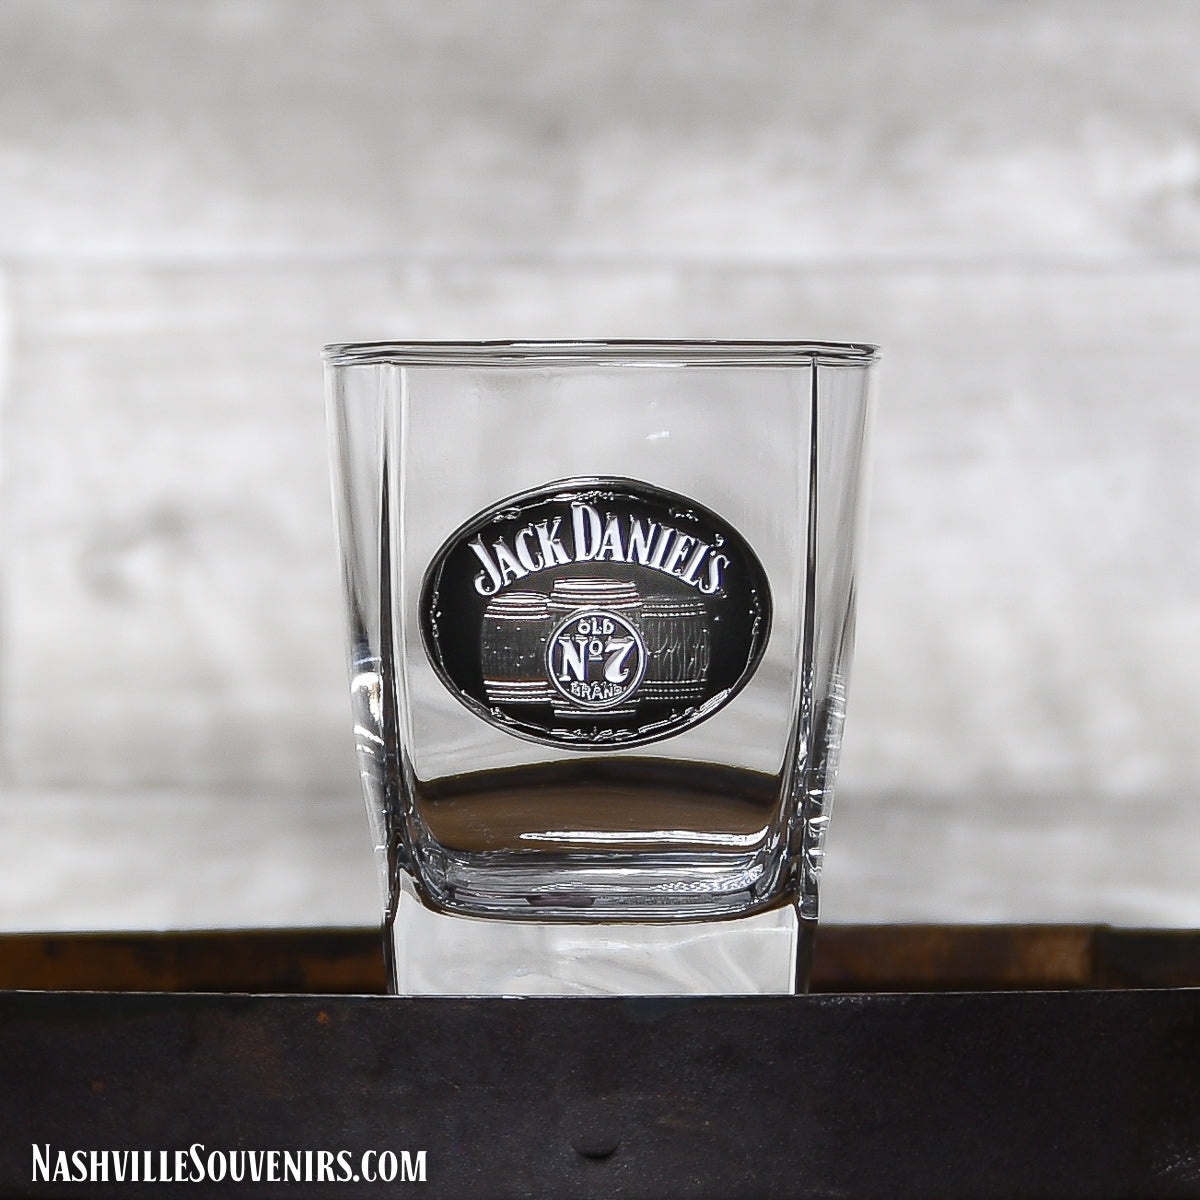 Officially licensed Jack Daniels Double Old Fashioned Glass with Medallion. FREE SHIPPING on all US orders over $75!